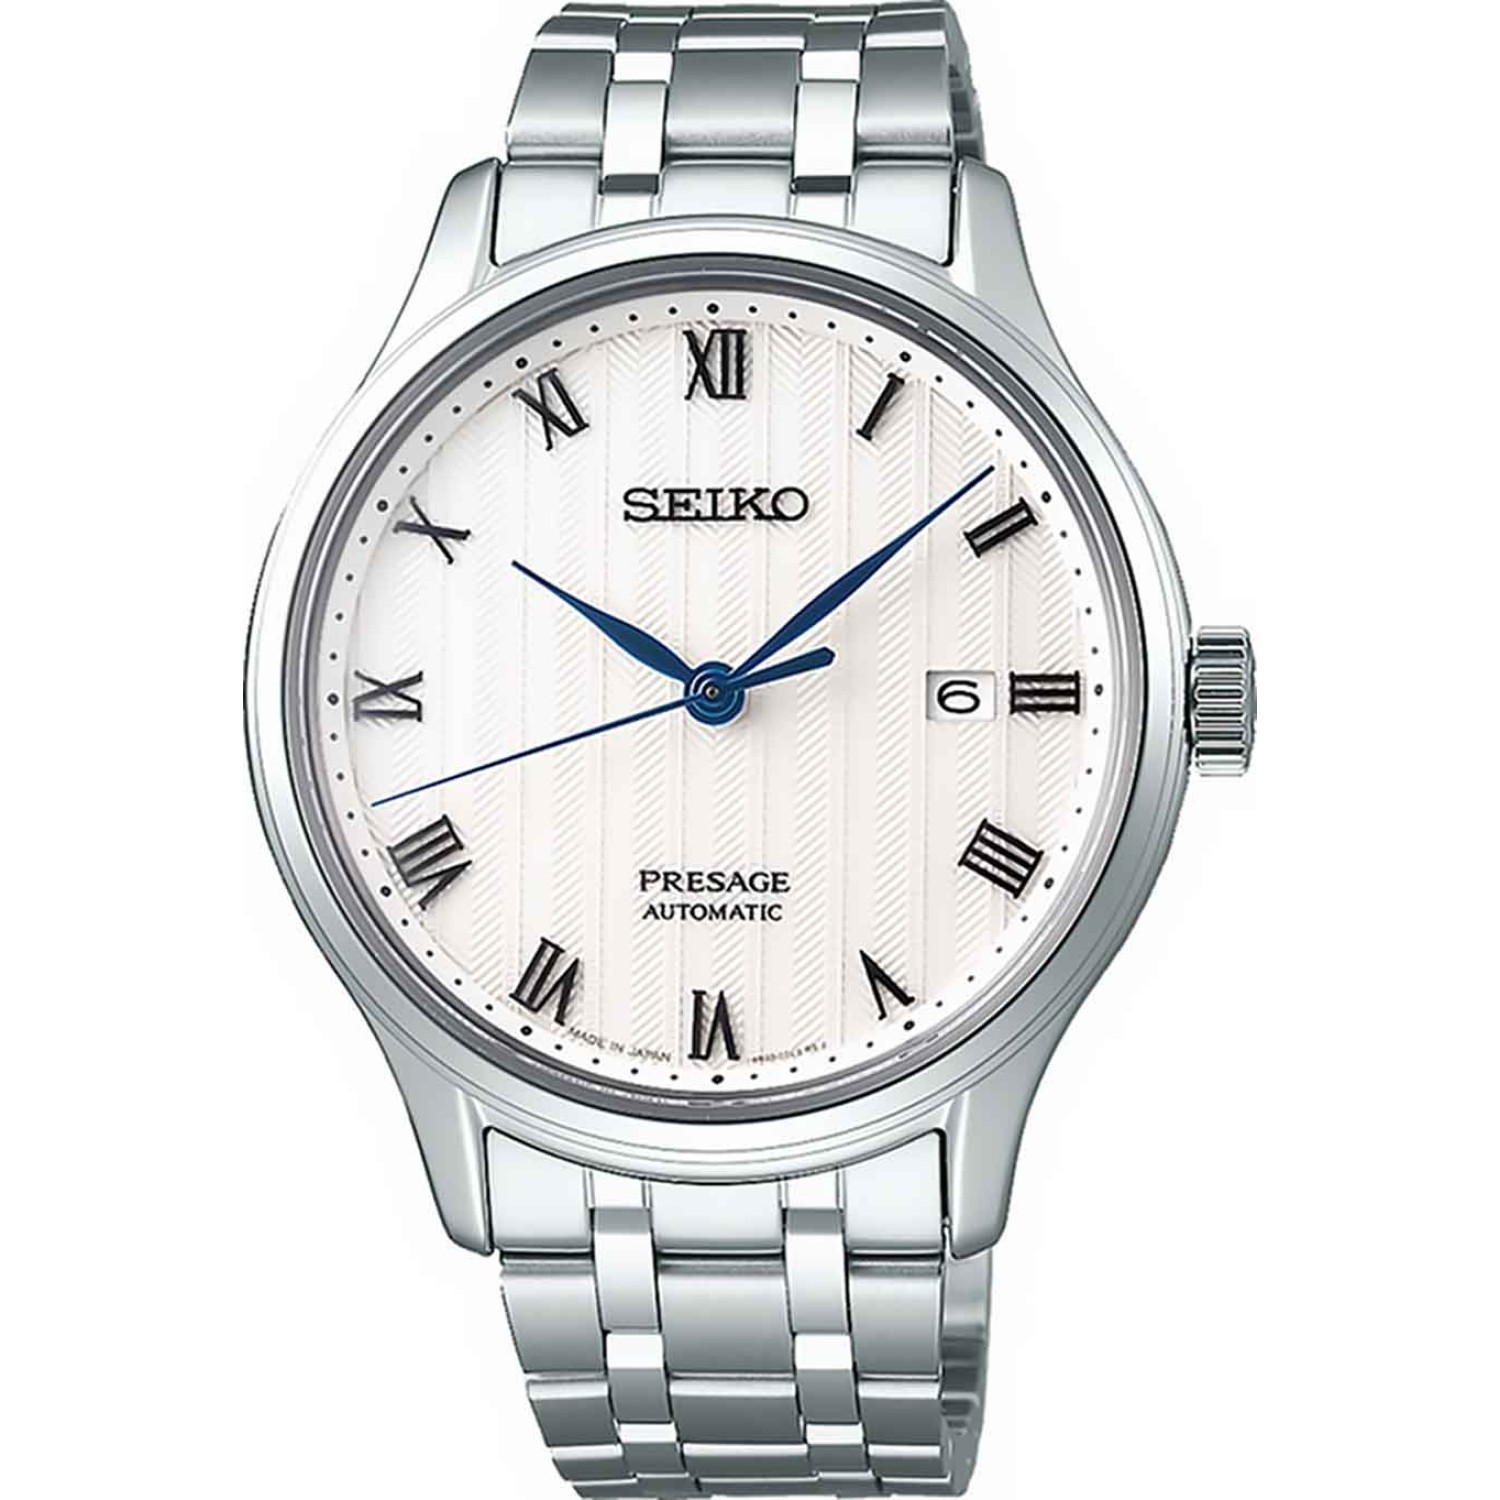 SRPC79J1 SEIKO Presage Automatic Watch. 3 Months No Payments and Interest for Q Card holders LAYBUY - Pay it easy, in 6 weekly payments and have it now. Only pay the price of your purchase, when you pay your instalments on time. A late fee may be applied 